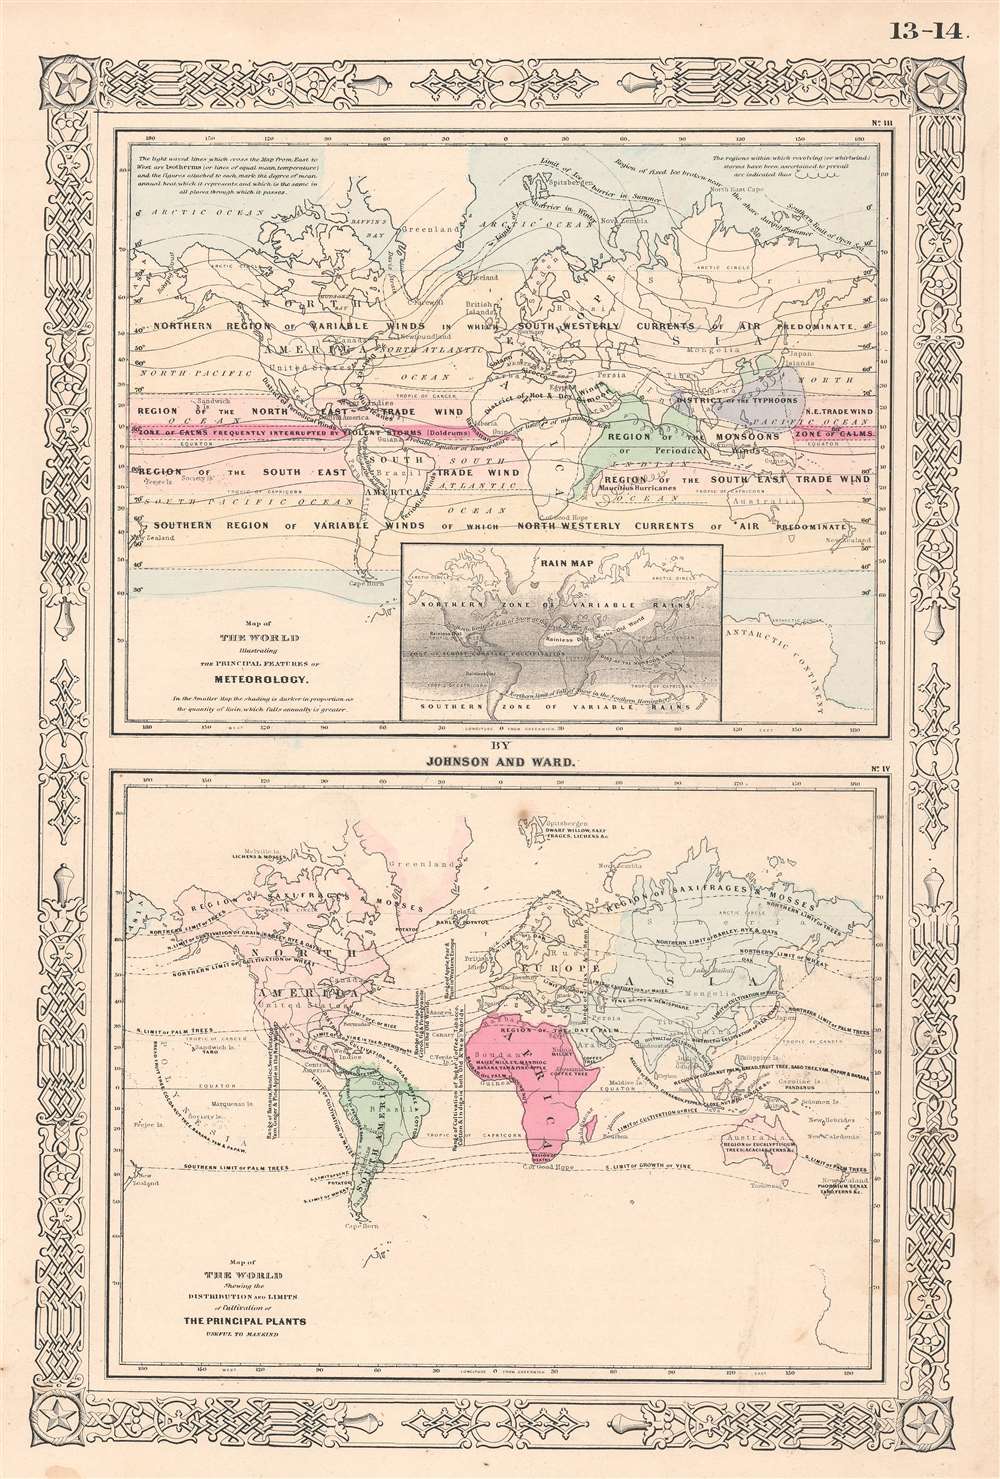 Map of The World Illustrating the Principal Features of Meteorology.  Map of the World Showing the Distributions and Limits of Cultivation of The Principal Plants Useful to Mankind. - Main View